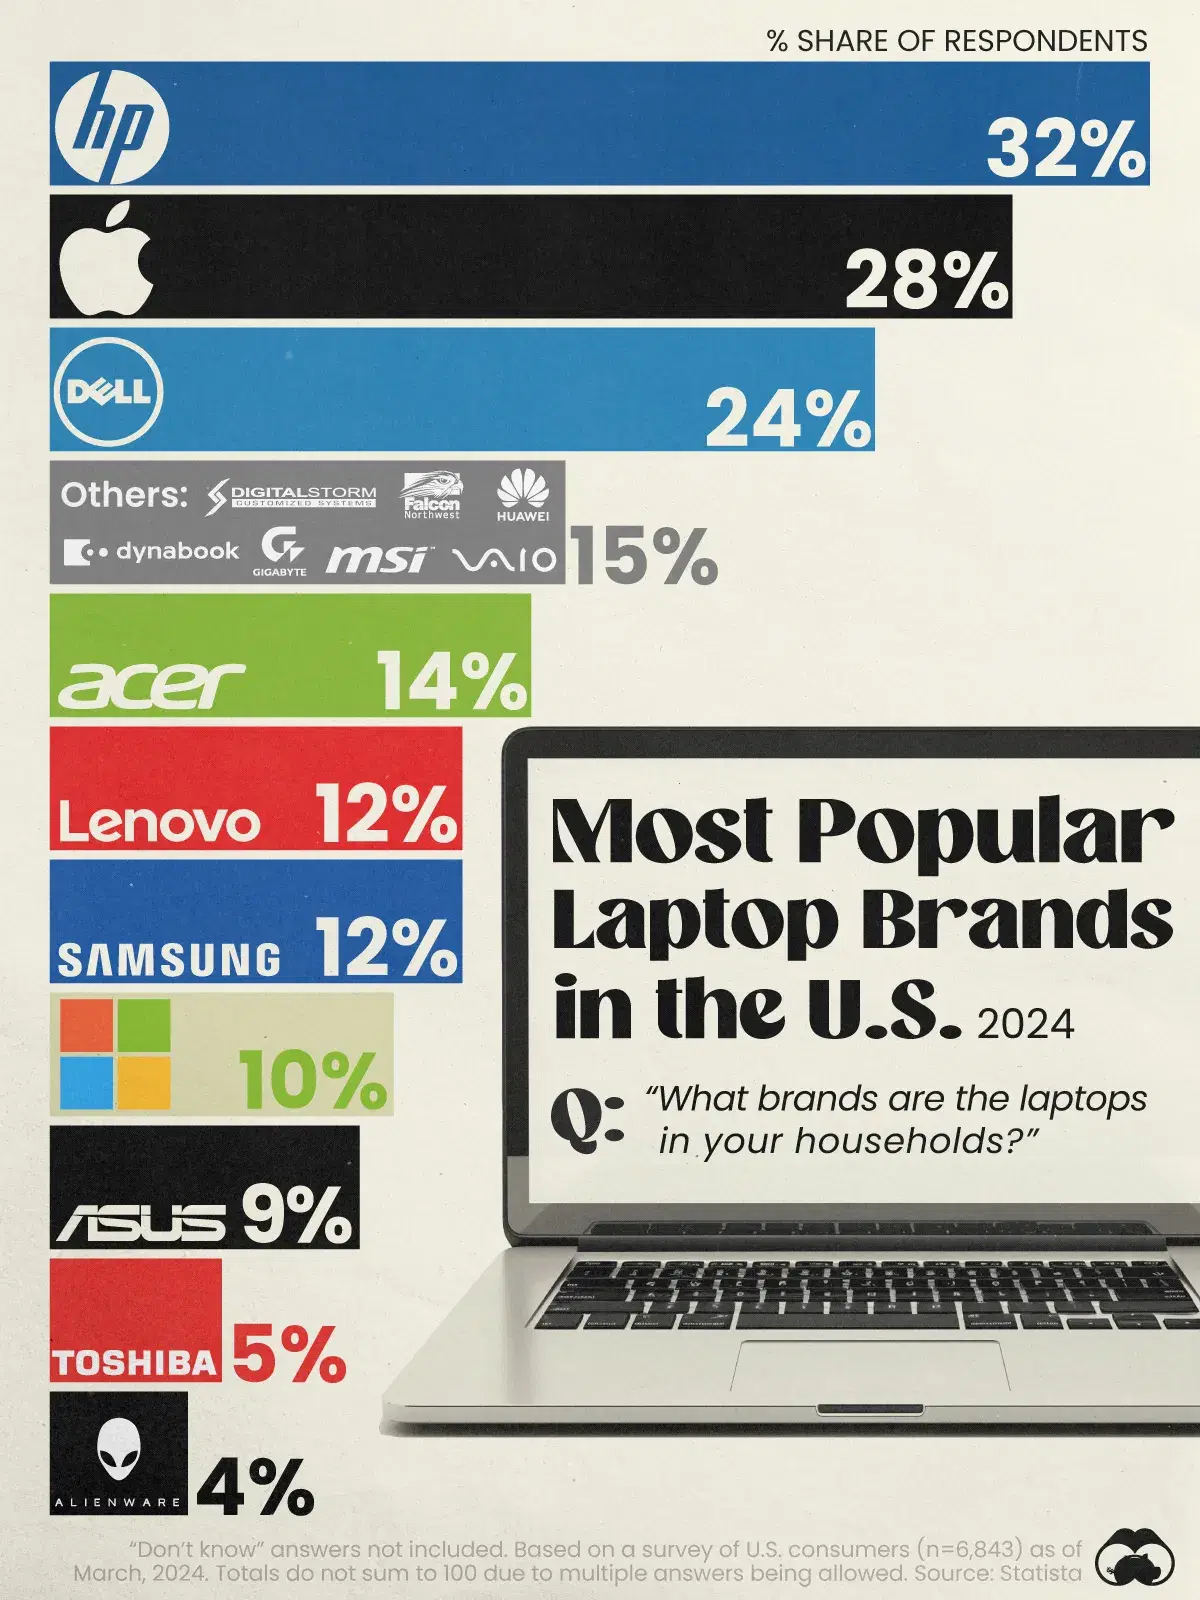 🍎 Apple NOT the #1 Brand in the U.S. For Laptops